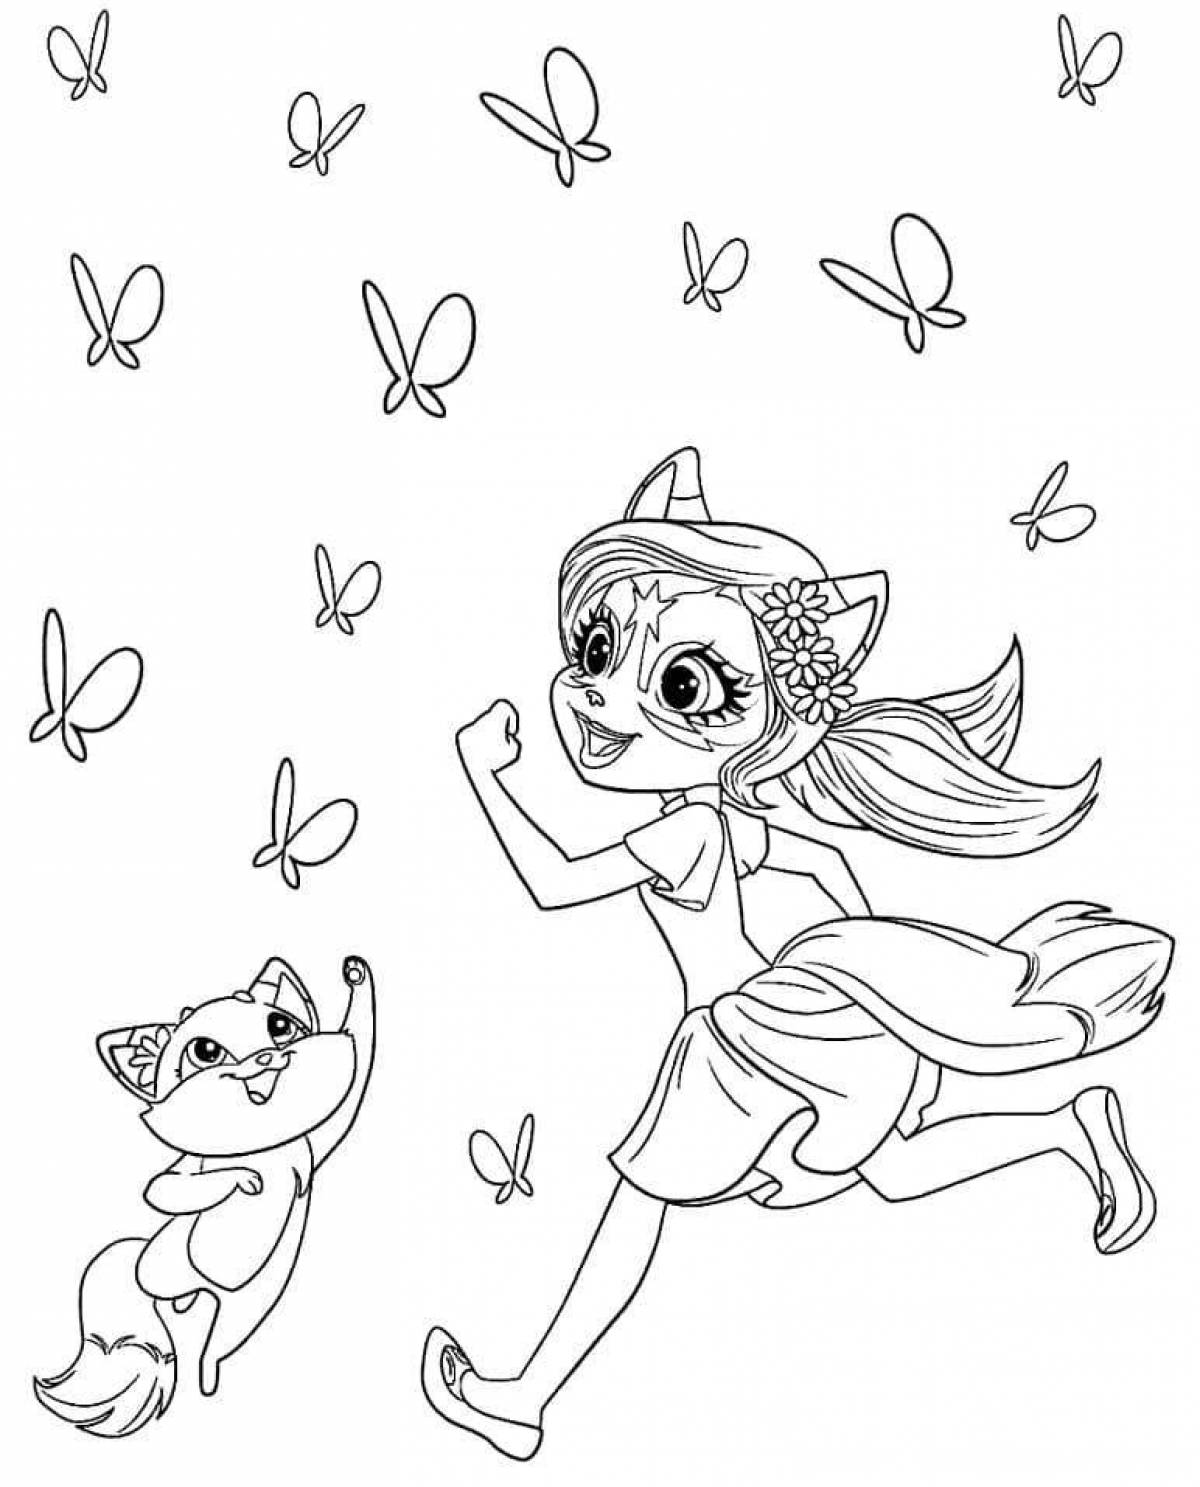 Colorful coloring pages enchantimals and pets